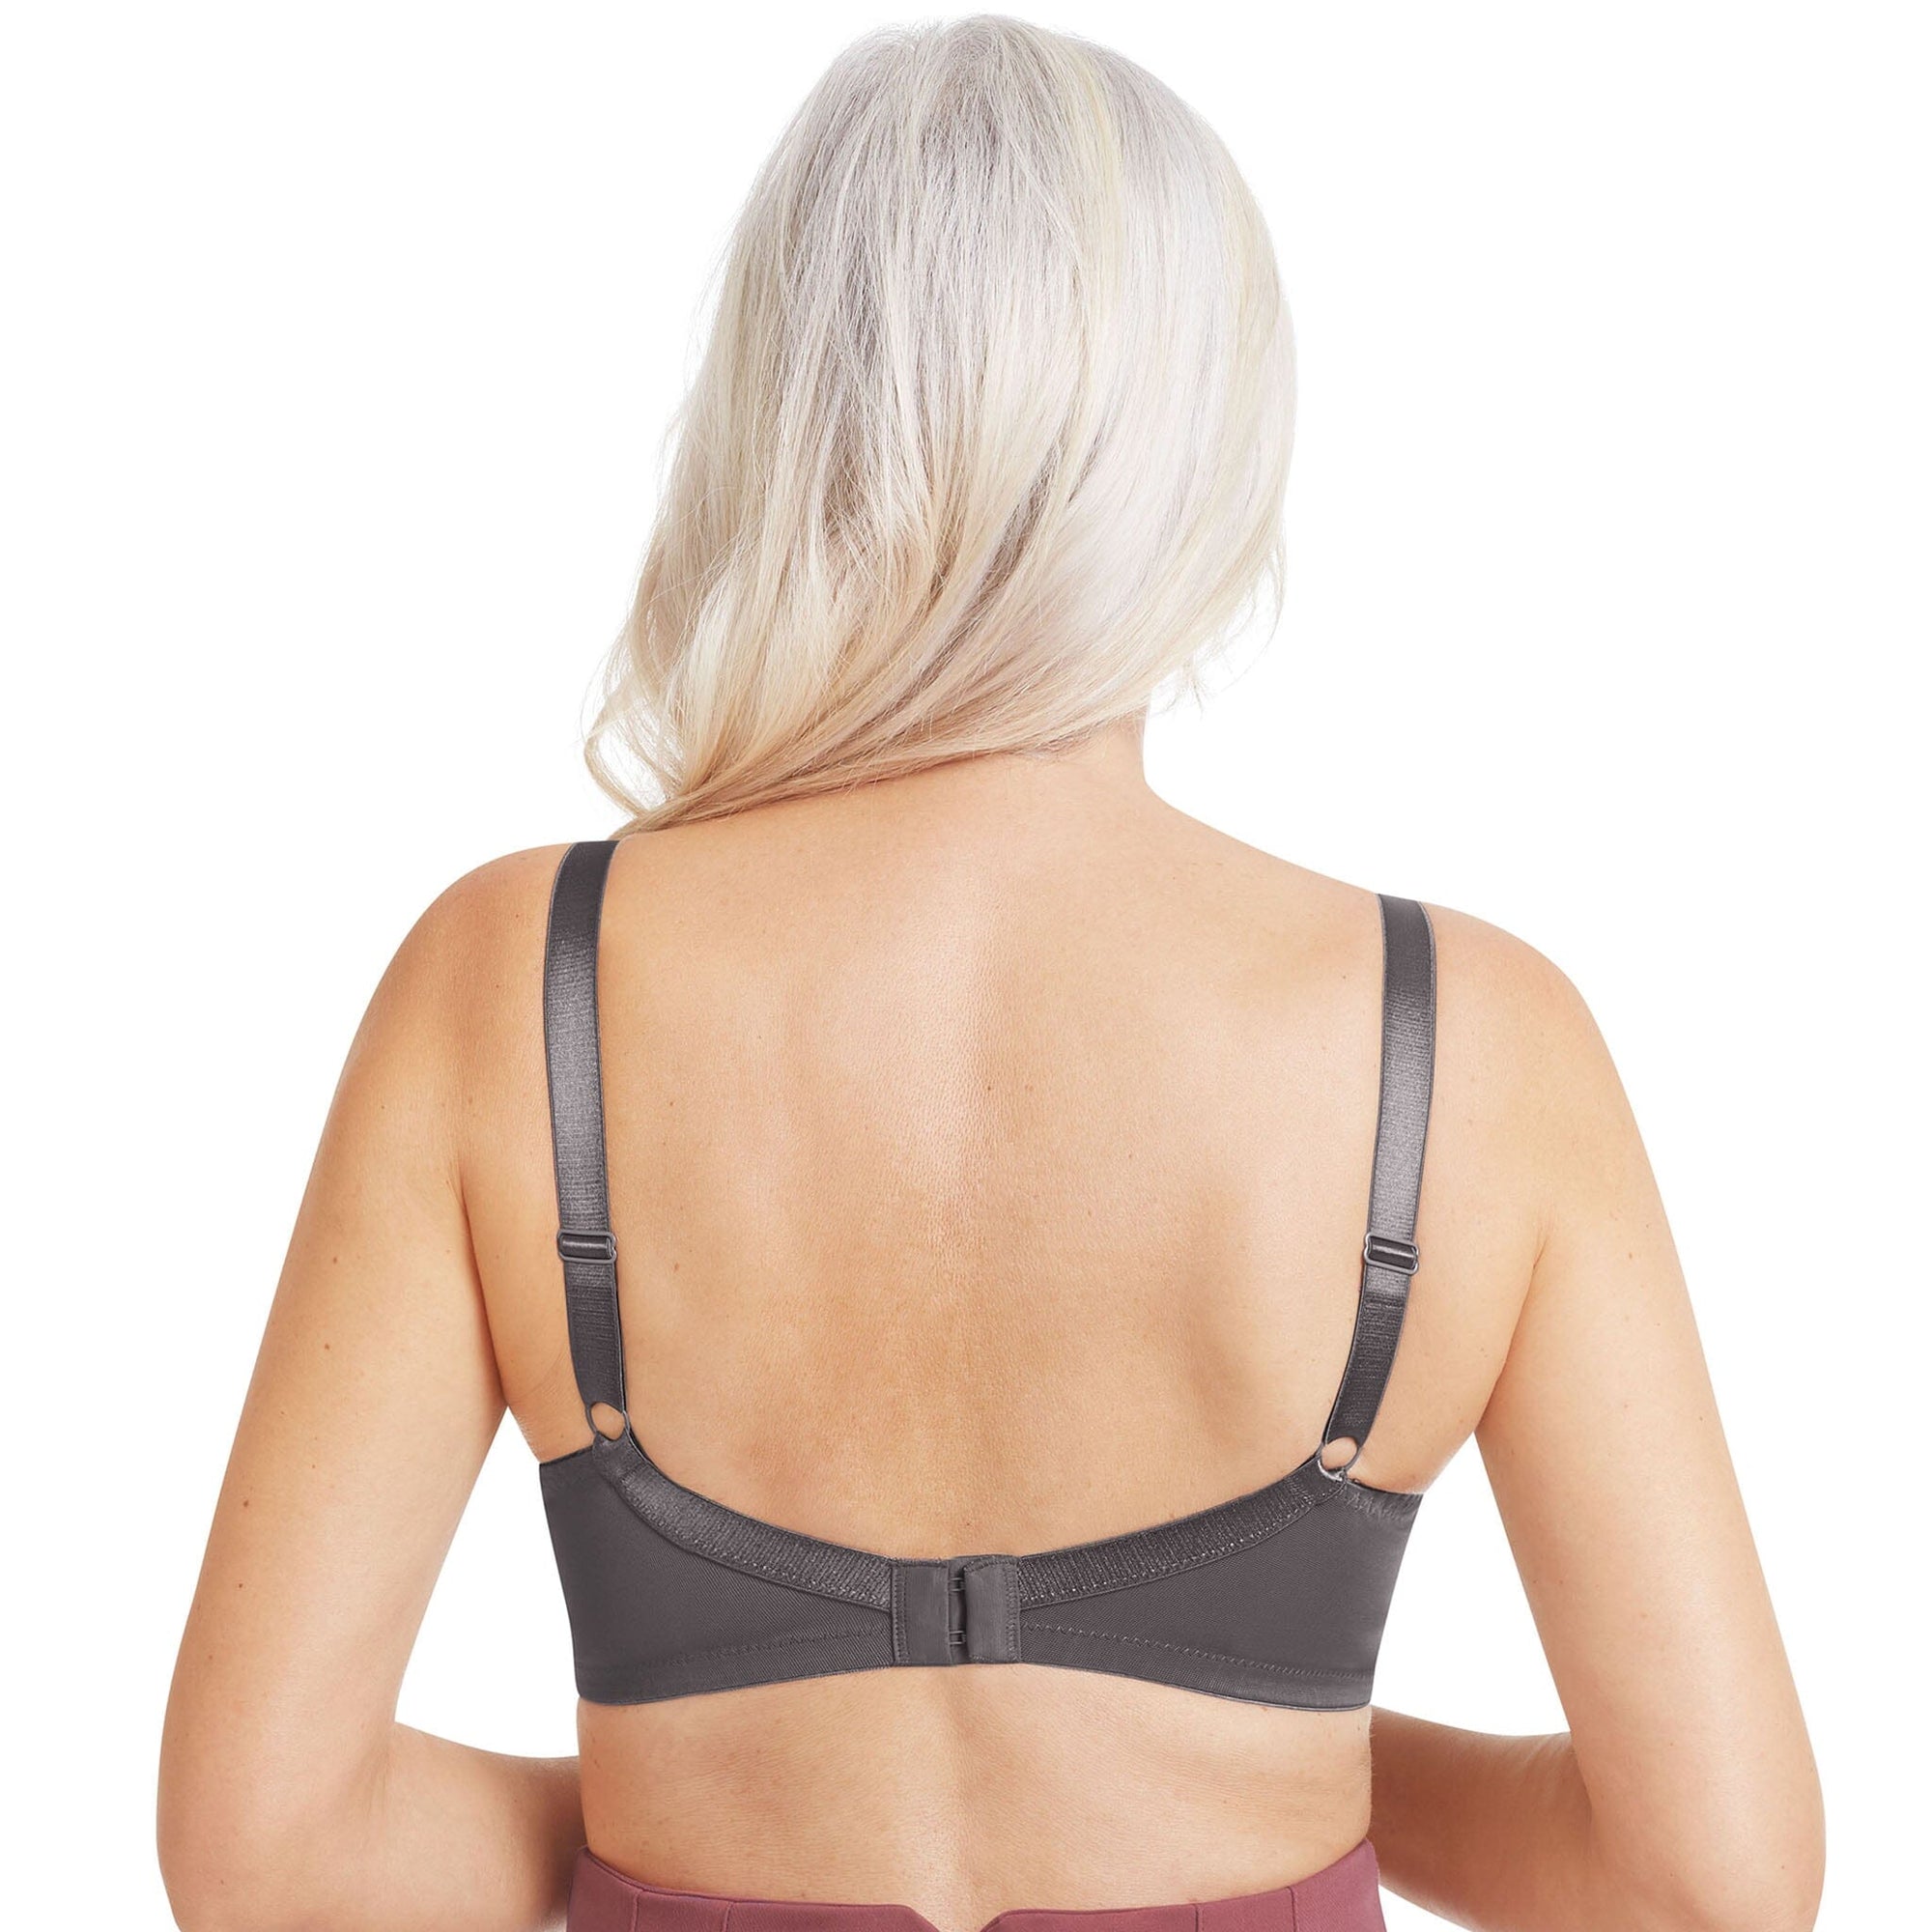 Amoena® Nancy Front Closure Bra Shown in Rose Nude-Back View